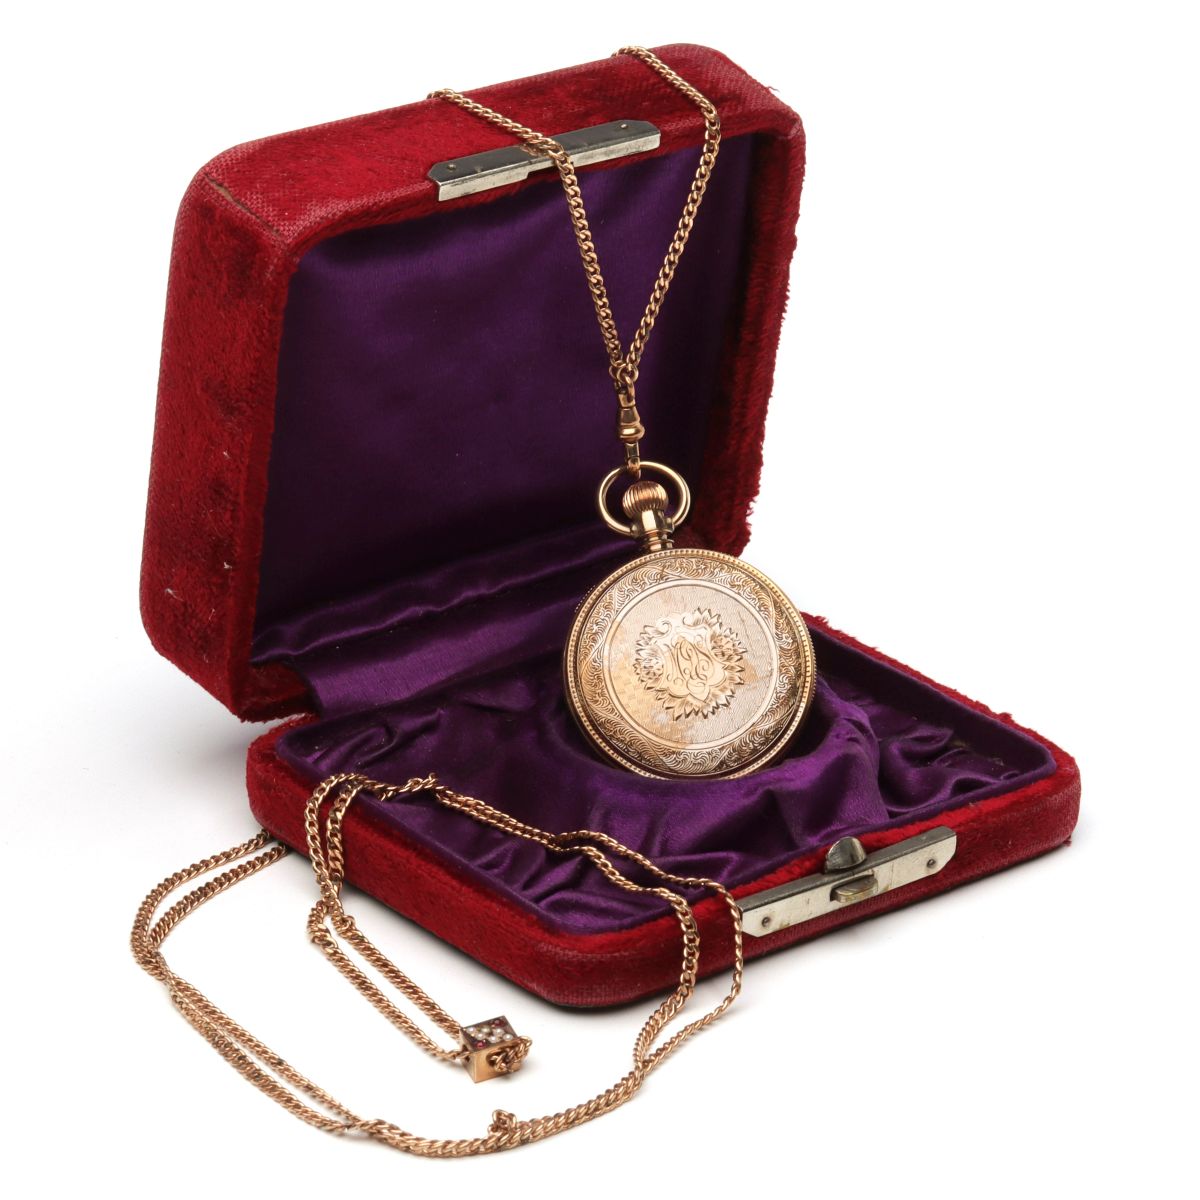 A 19TH C. ELGIN LADIES SOLID GOLD HUNTING CASE WATCH